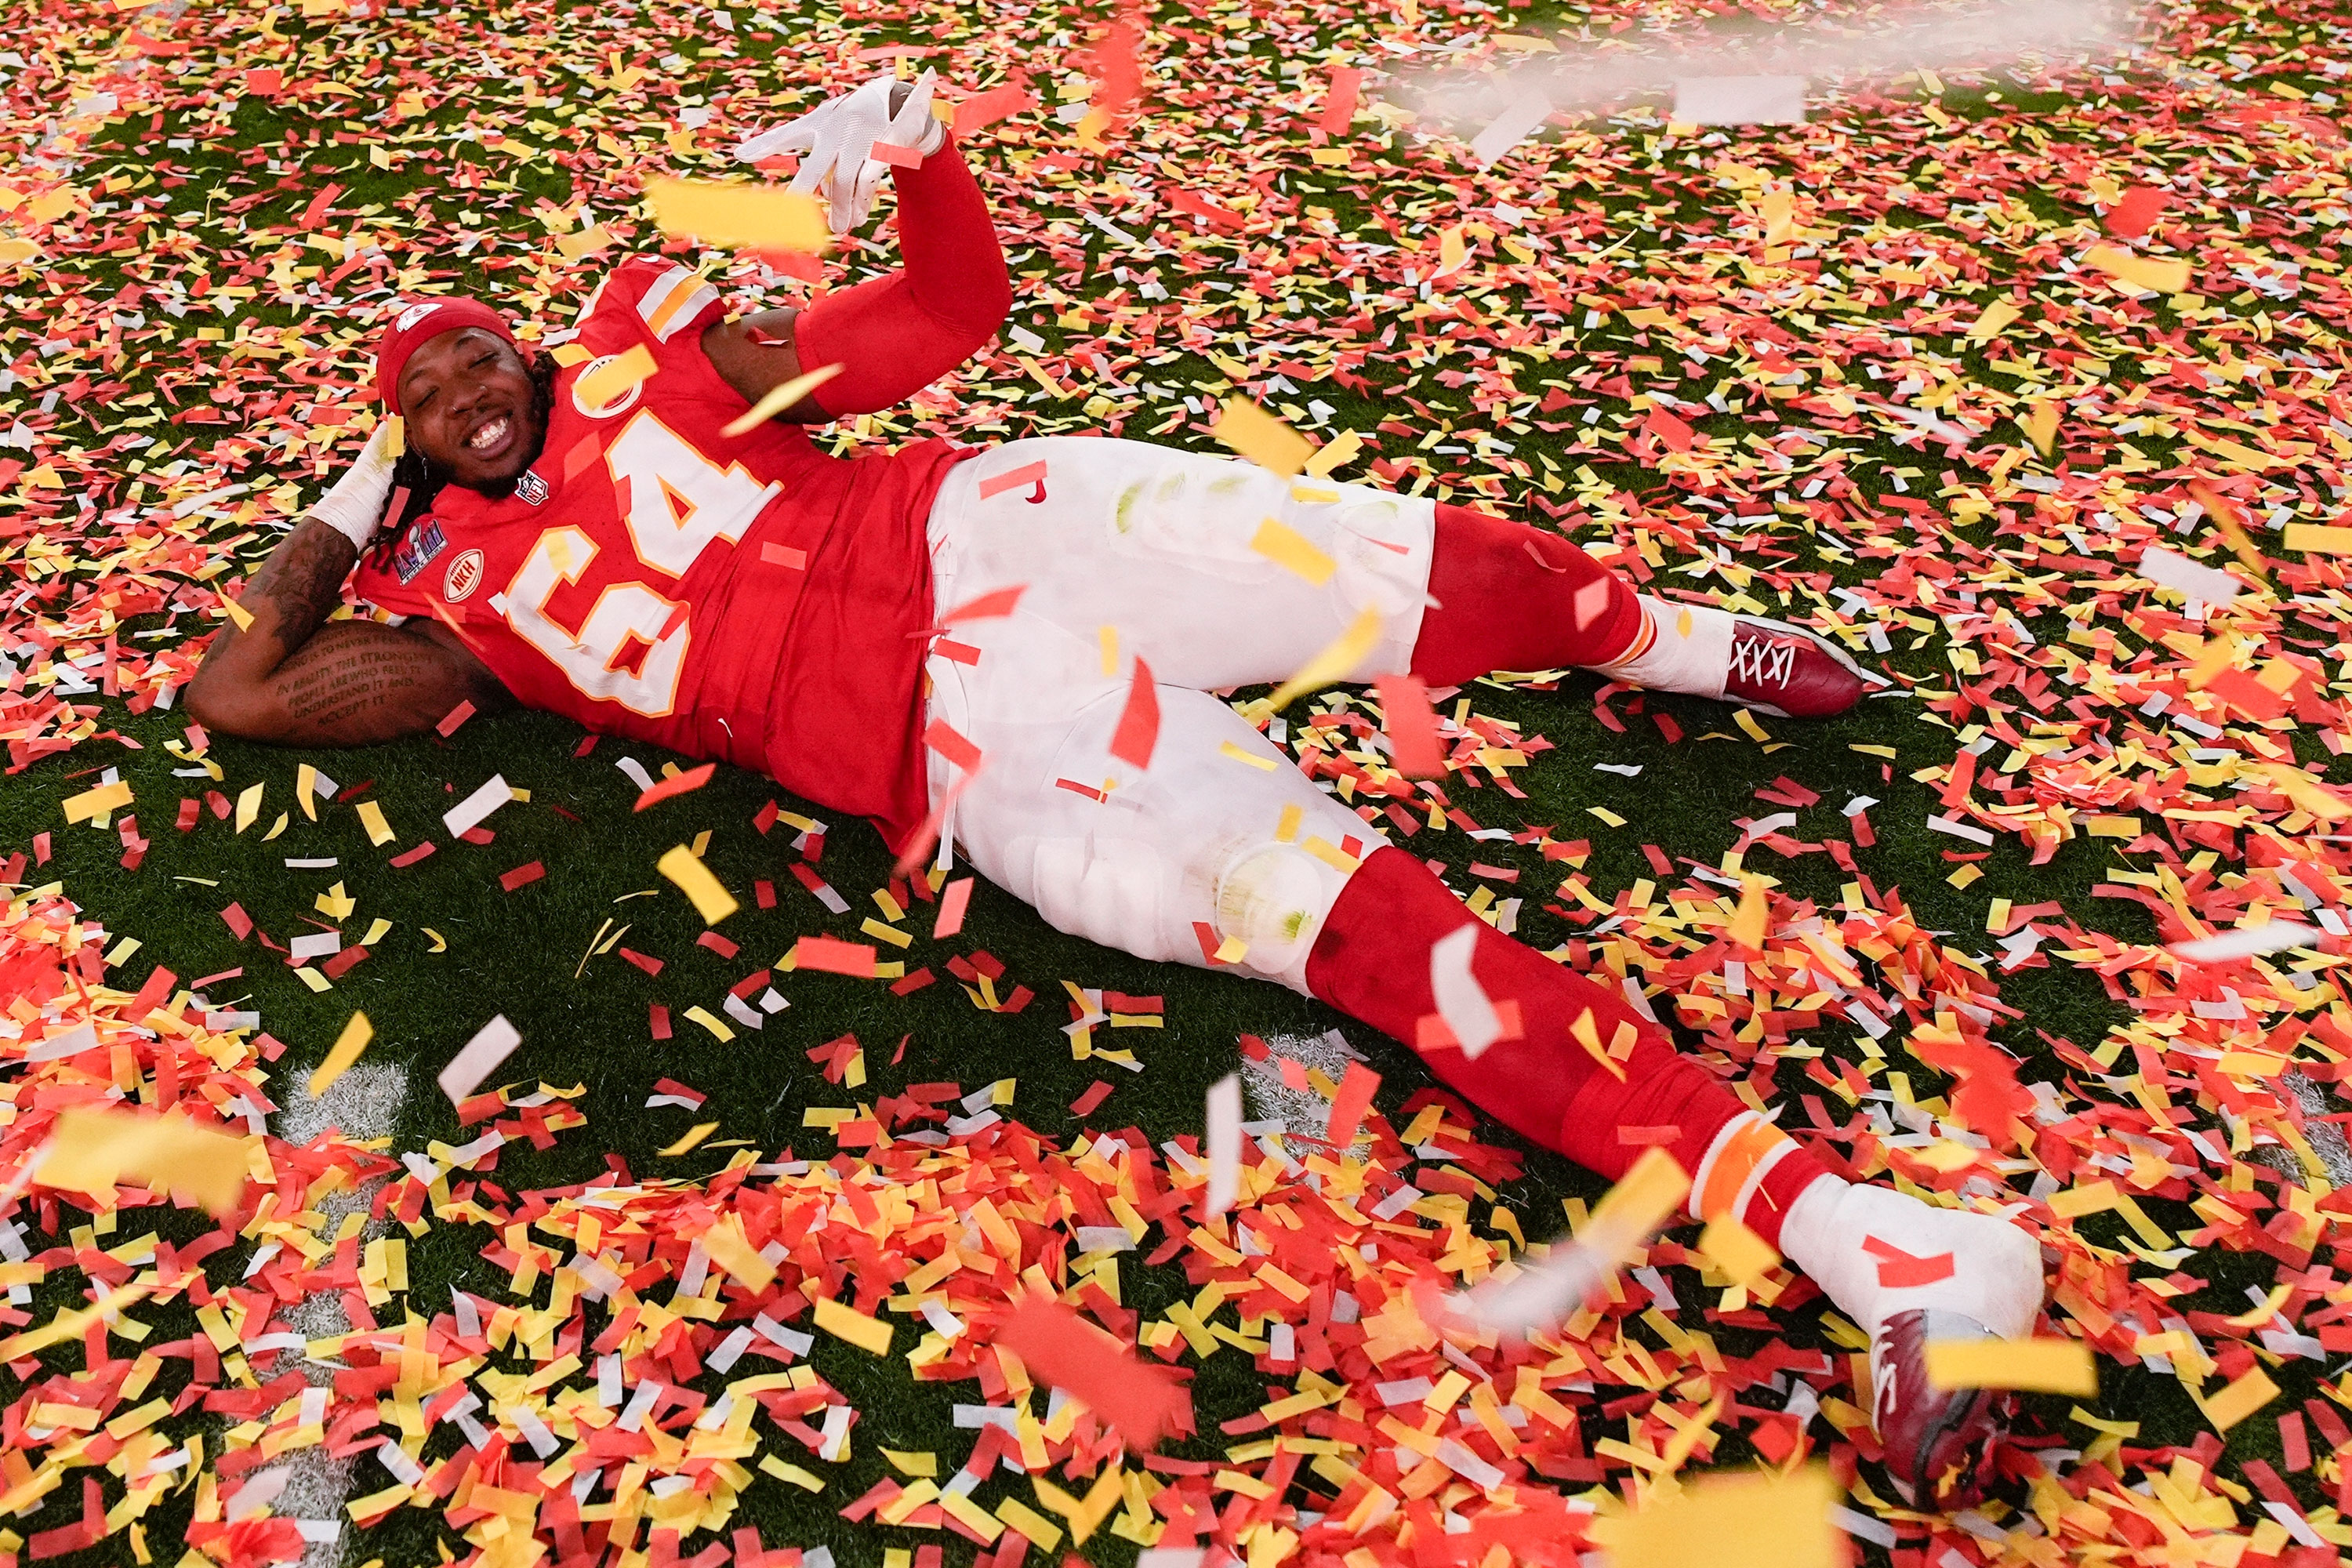 Kansas City Chiefs offensive tackle Wanya Morris celebrates on the field.